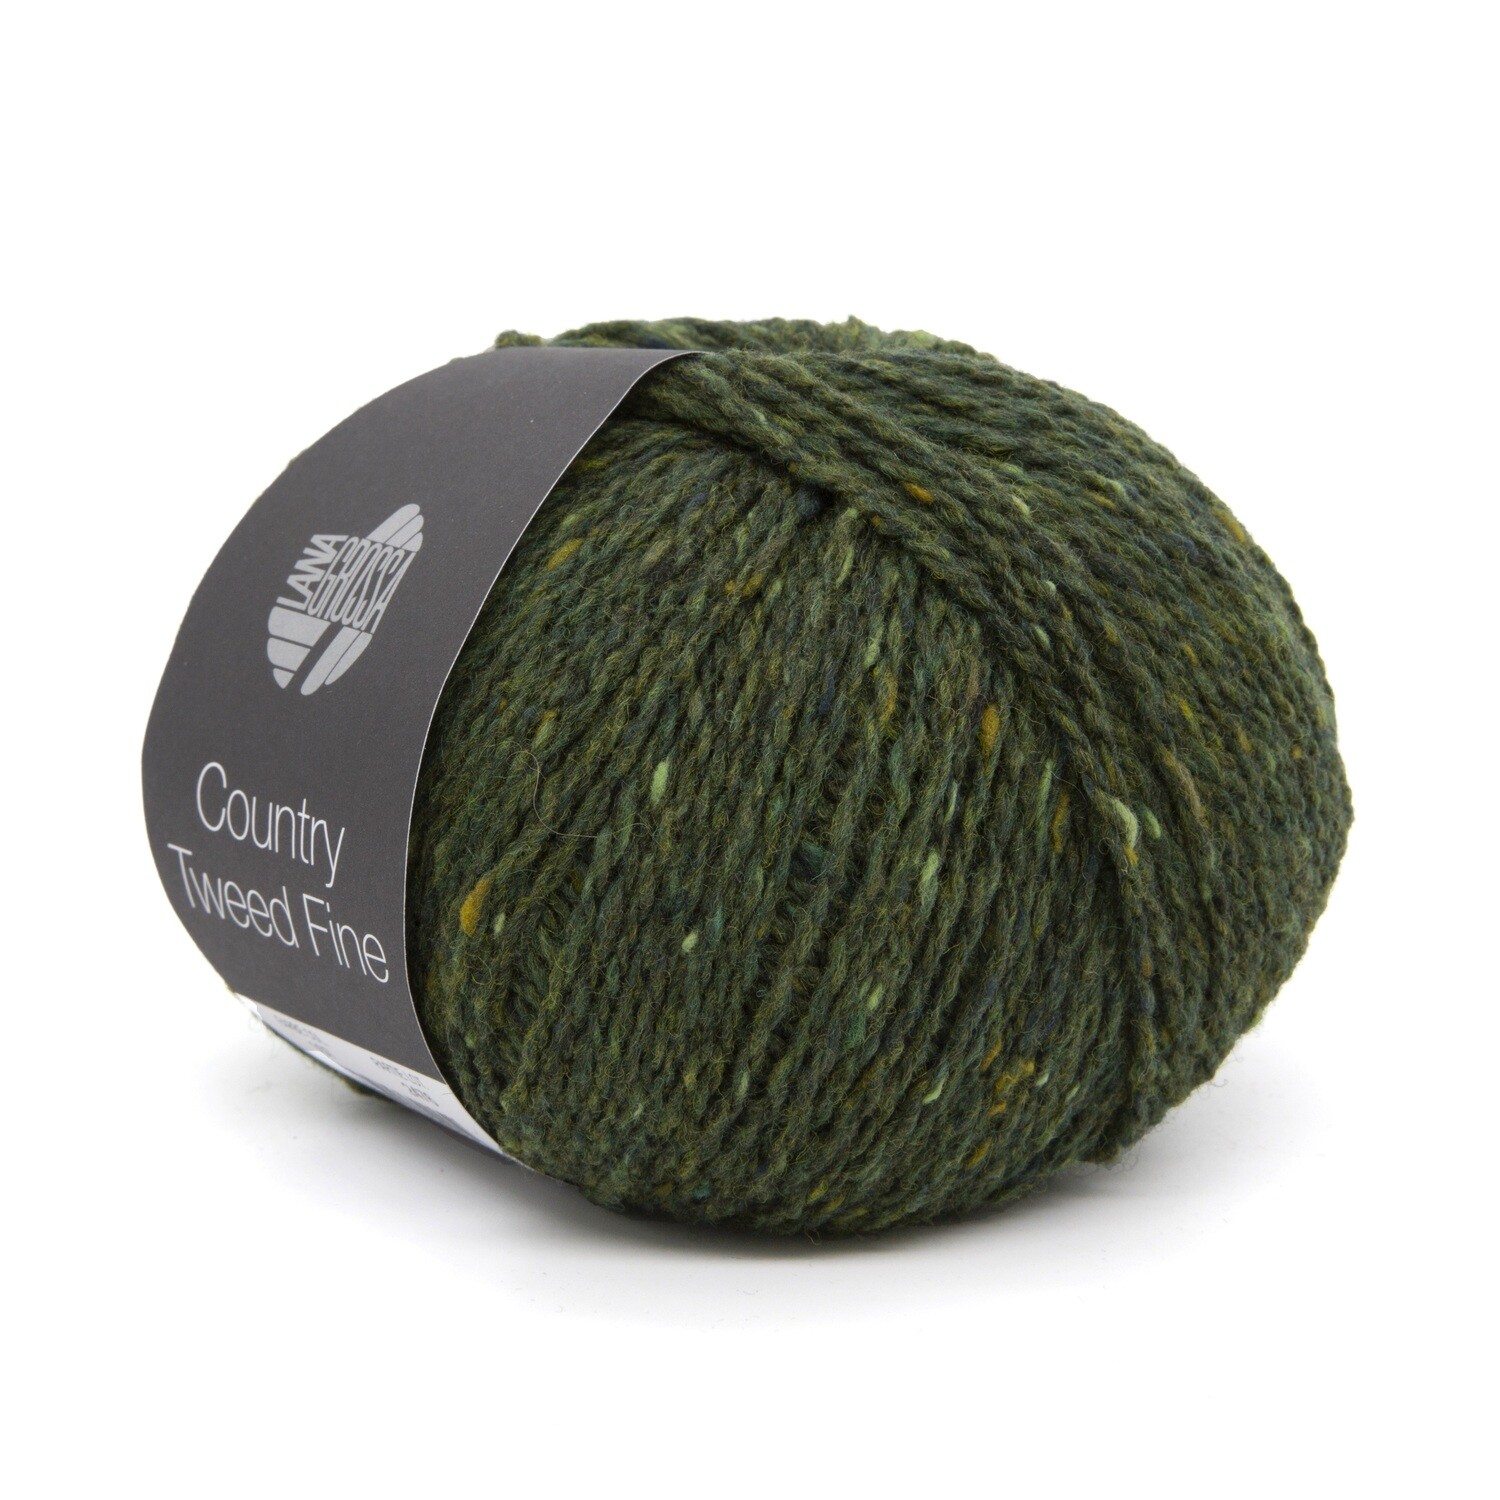 country tweed fine 107